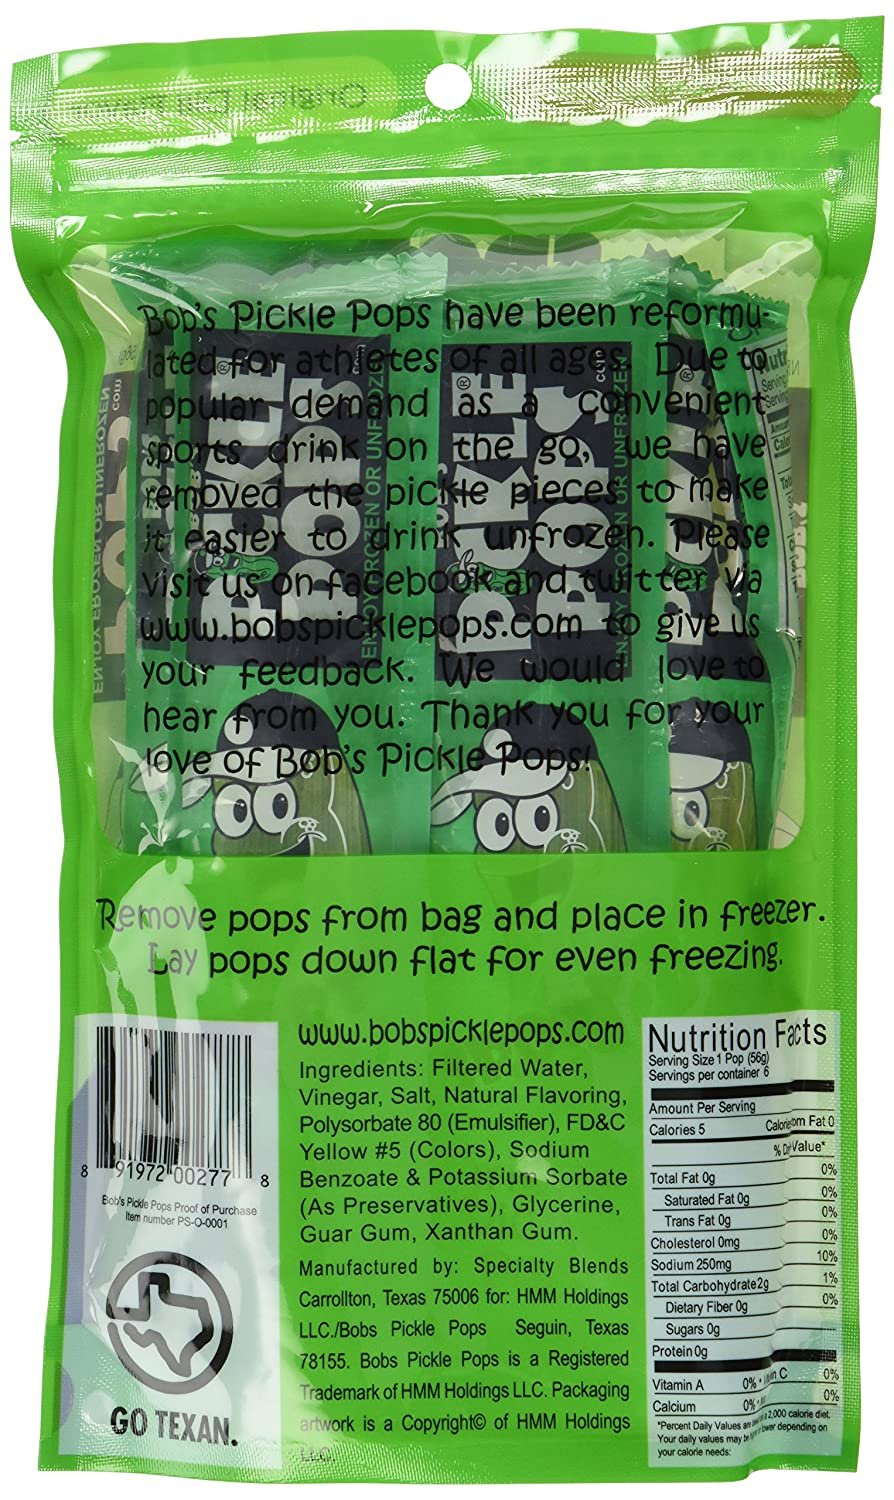 Bob's Dill Pickle Sport Ice Pops (6 Pack) - 3 Pack